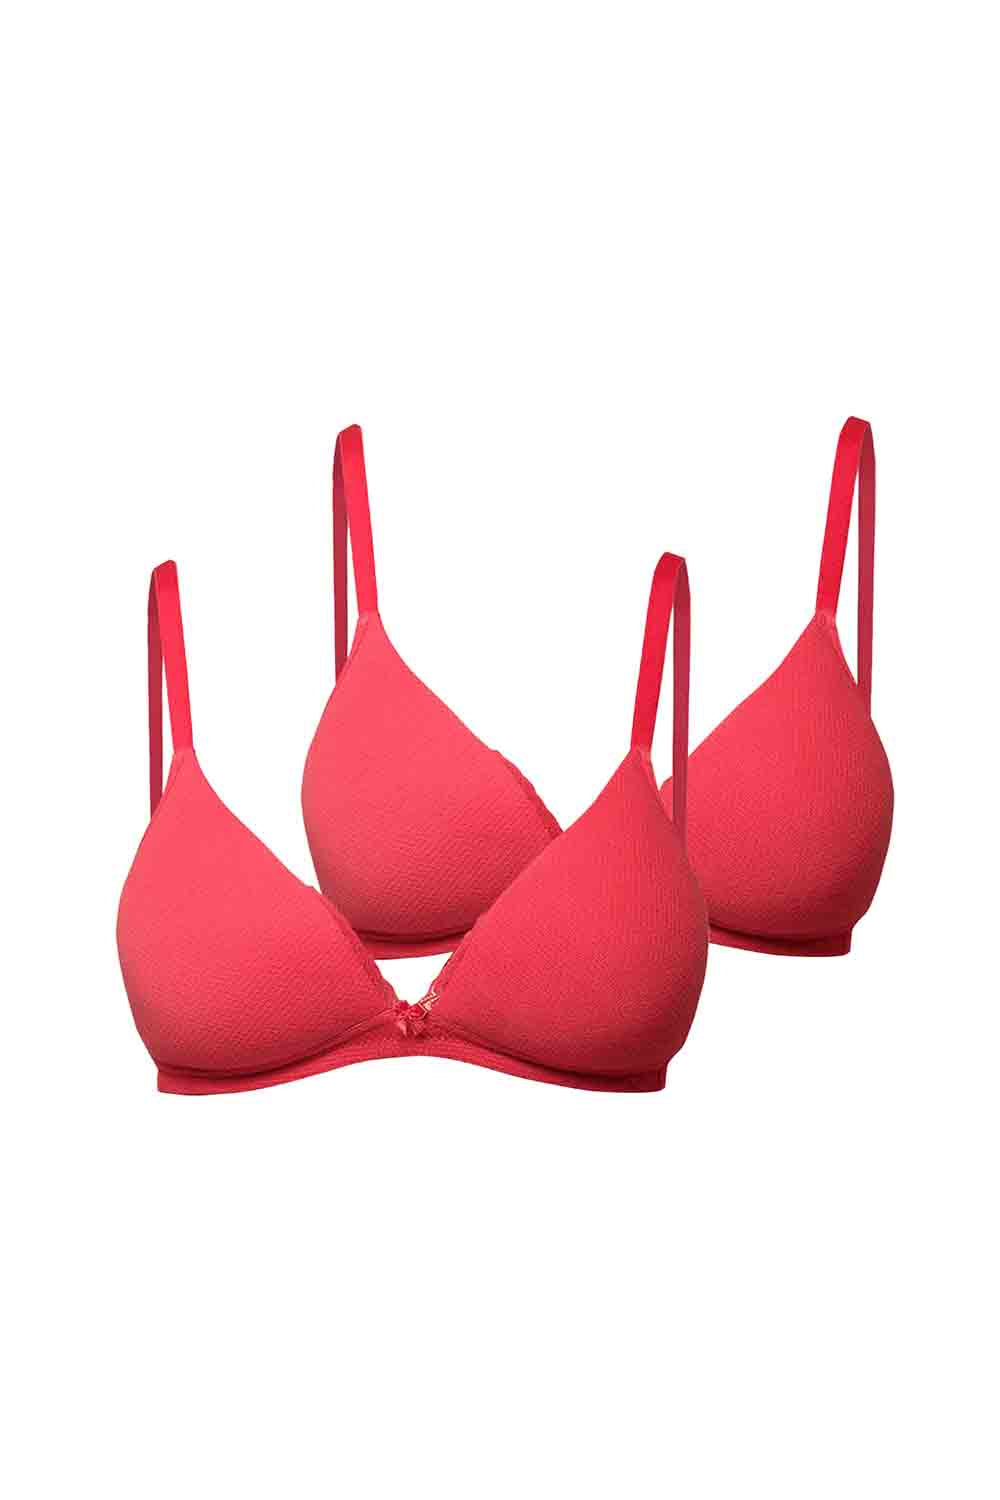 Pack of 3 Pink Bras Cotton Bra With Lycra Straps for Women